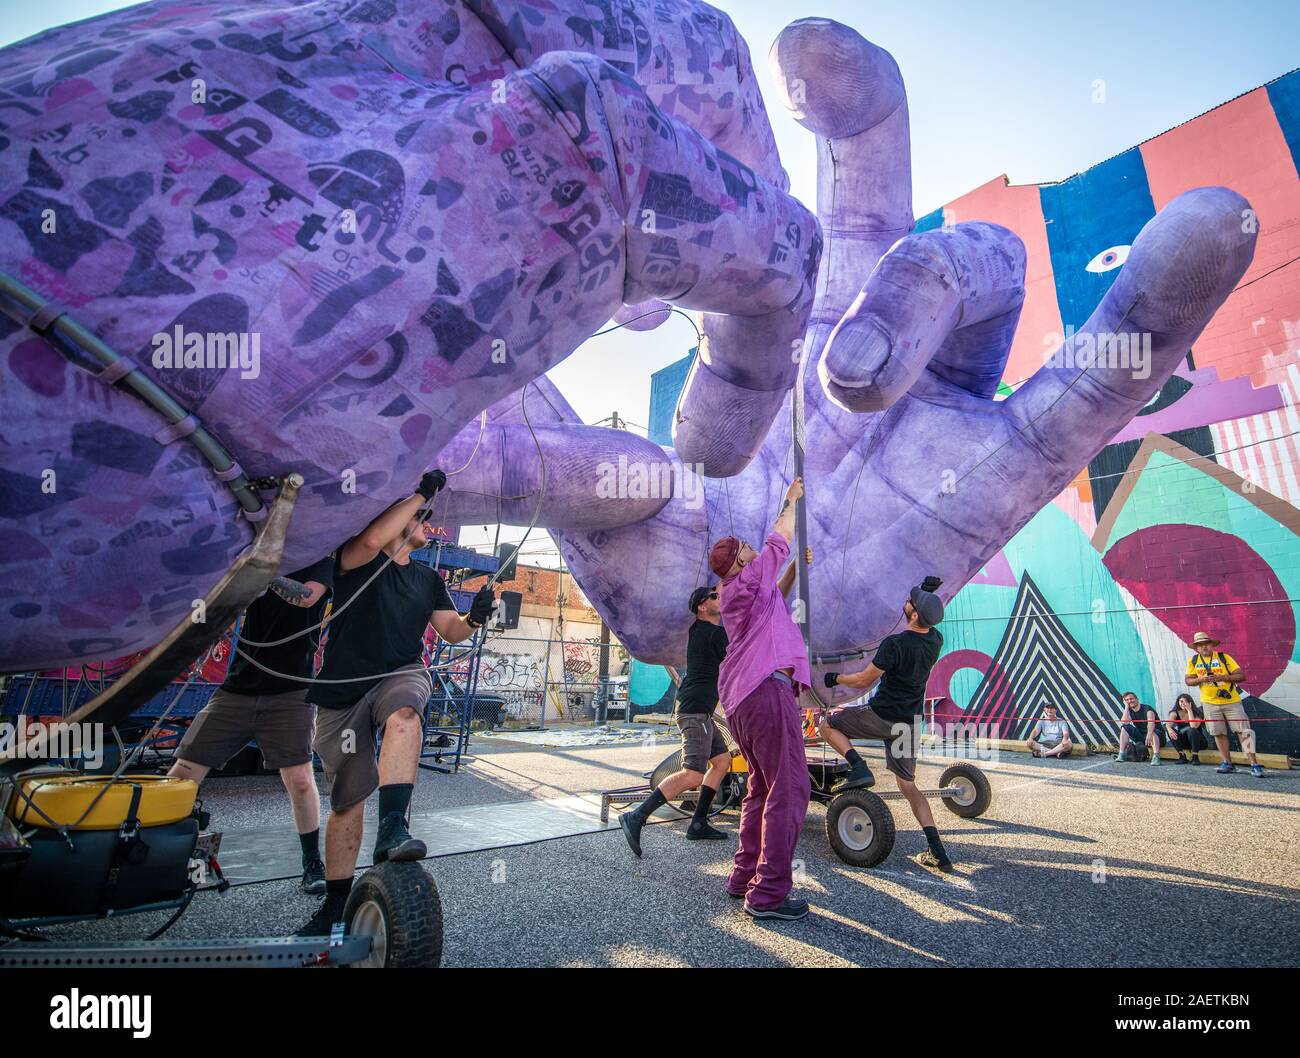 The Squonk Opera being set up by workers at Artscape 2019, Baltimore Maryland Stock Photo